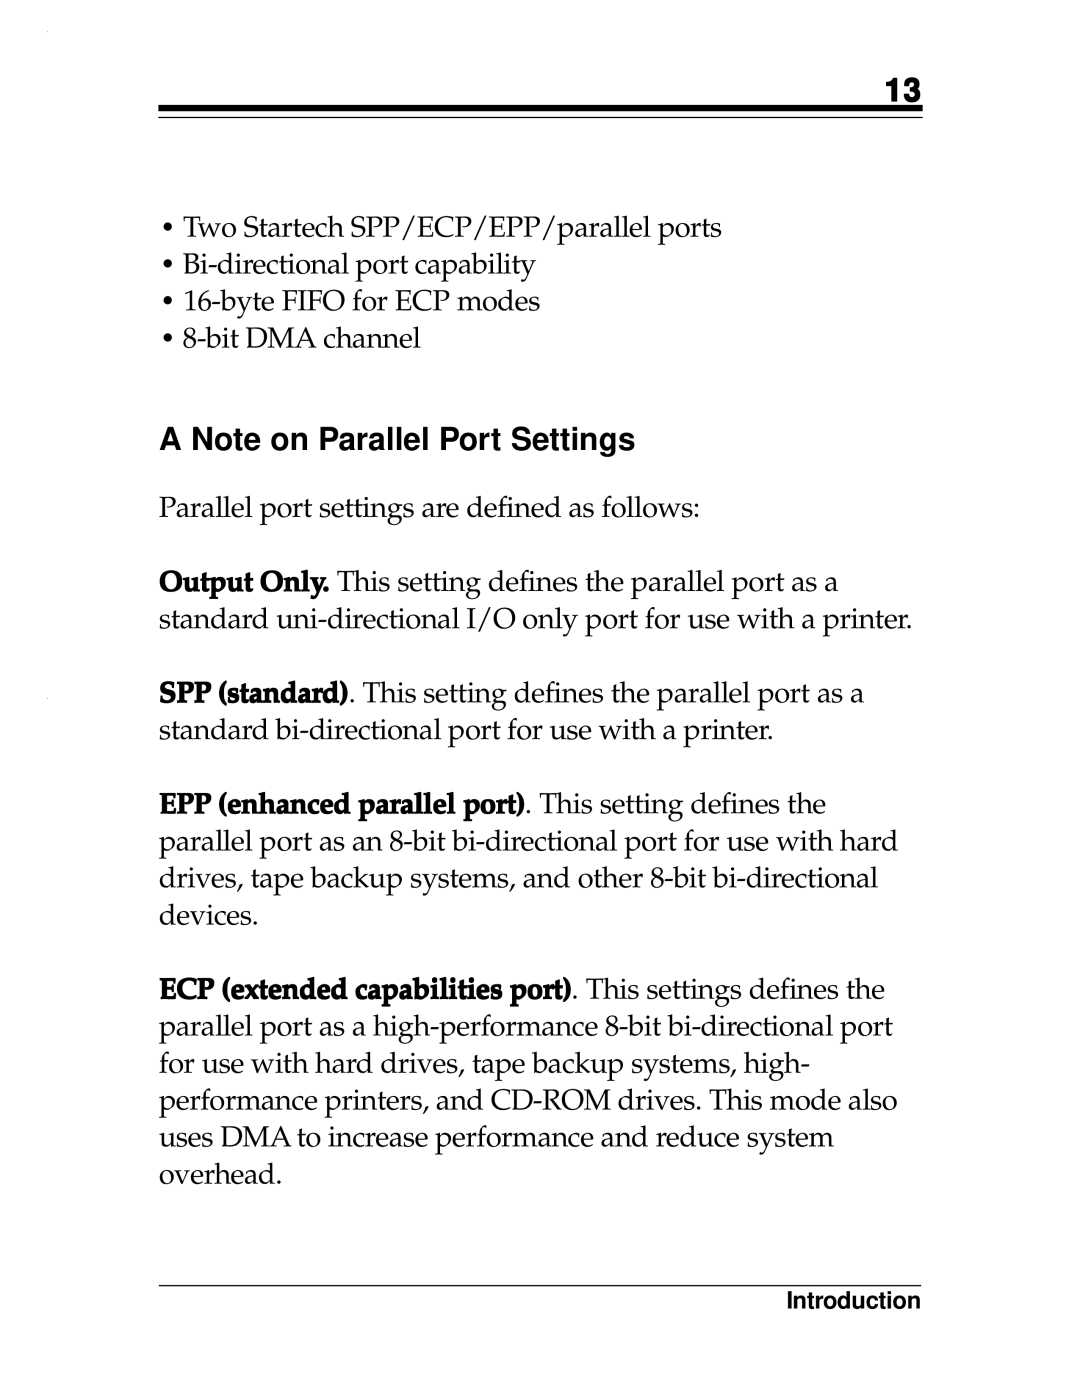 Boca Research 2x2, Turbo1x1 manual A Note on Parallel Port Settings 